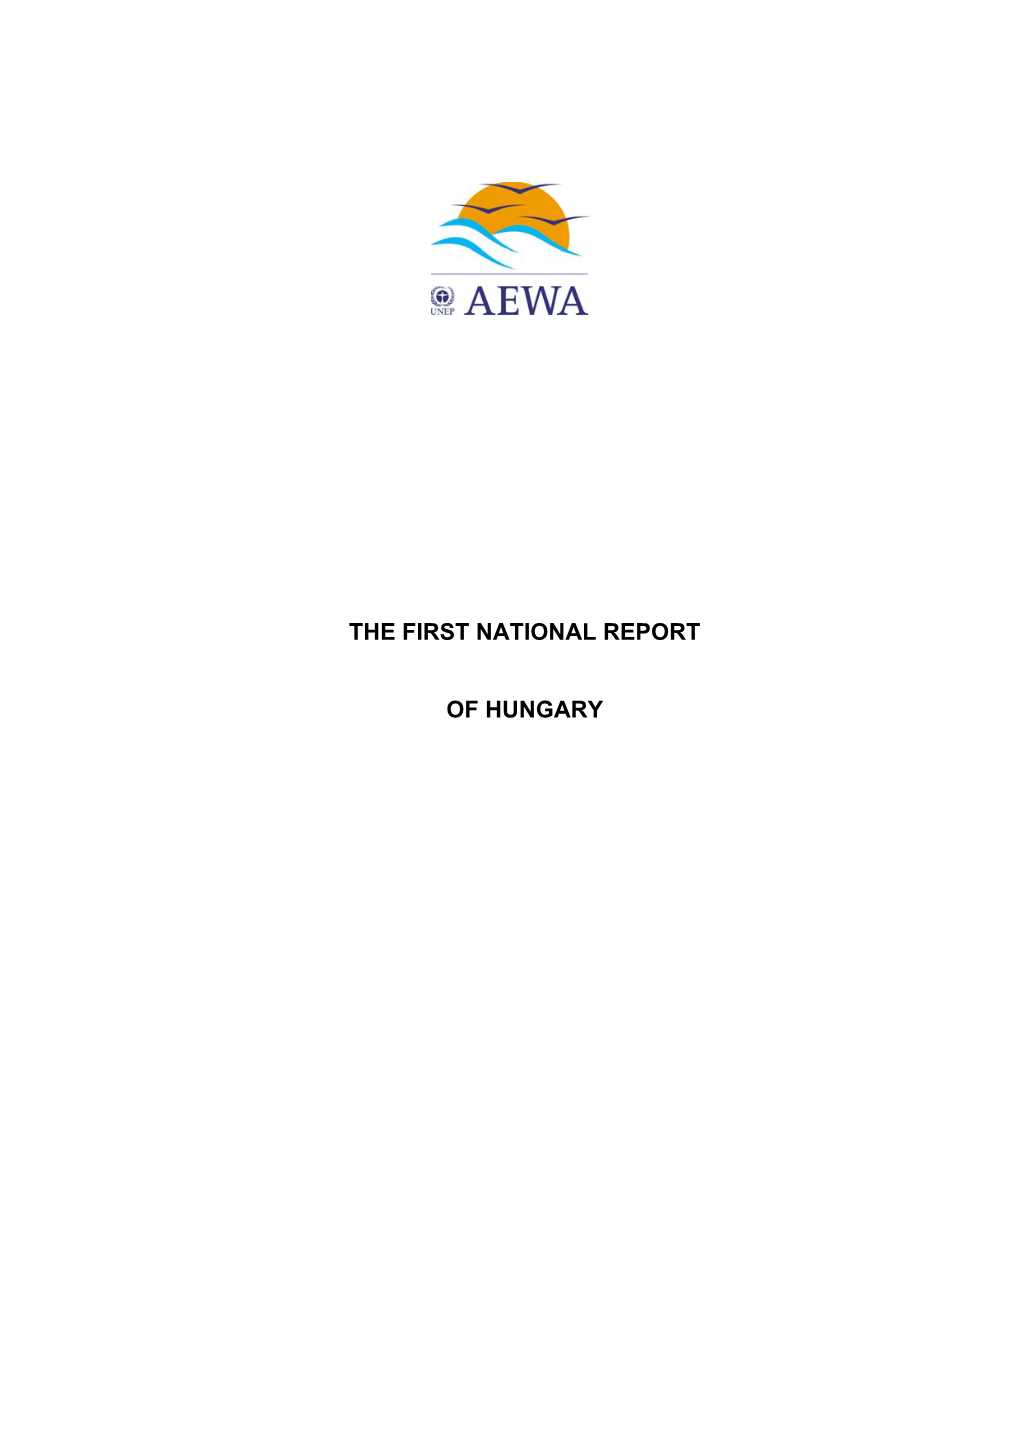 The First National Report of Hungary